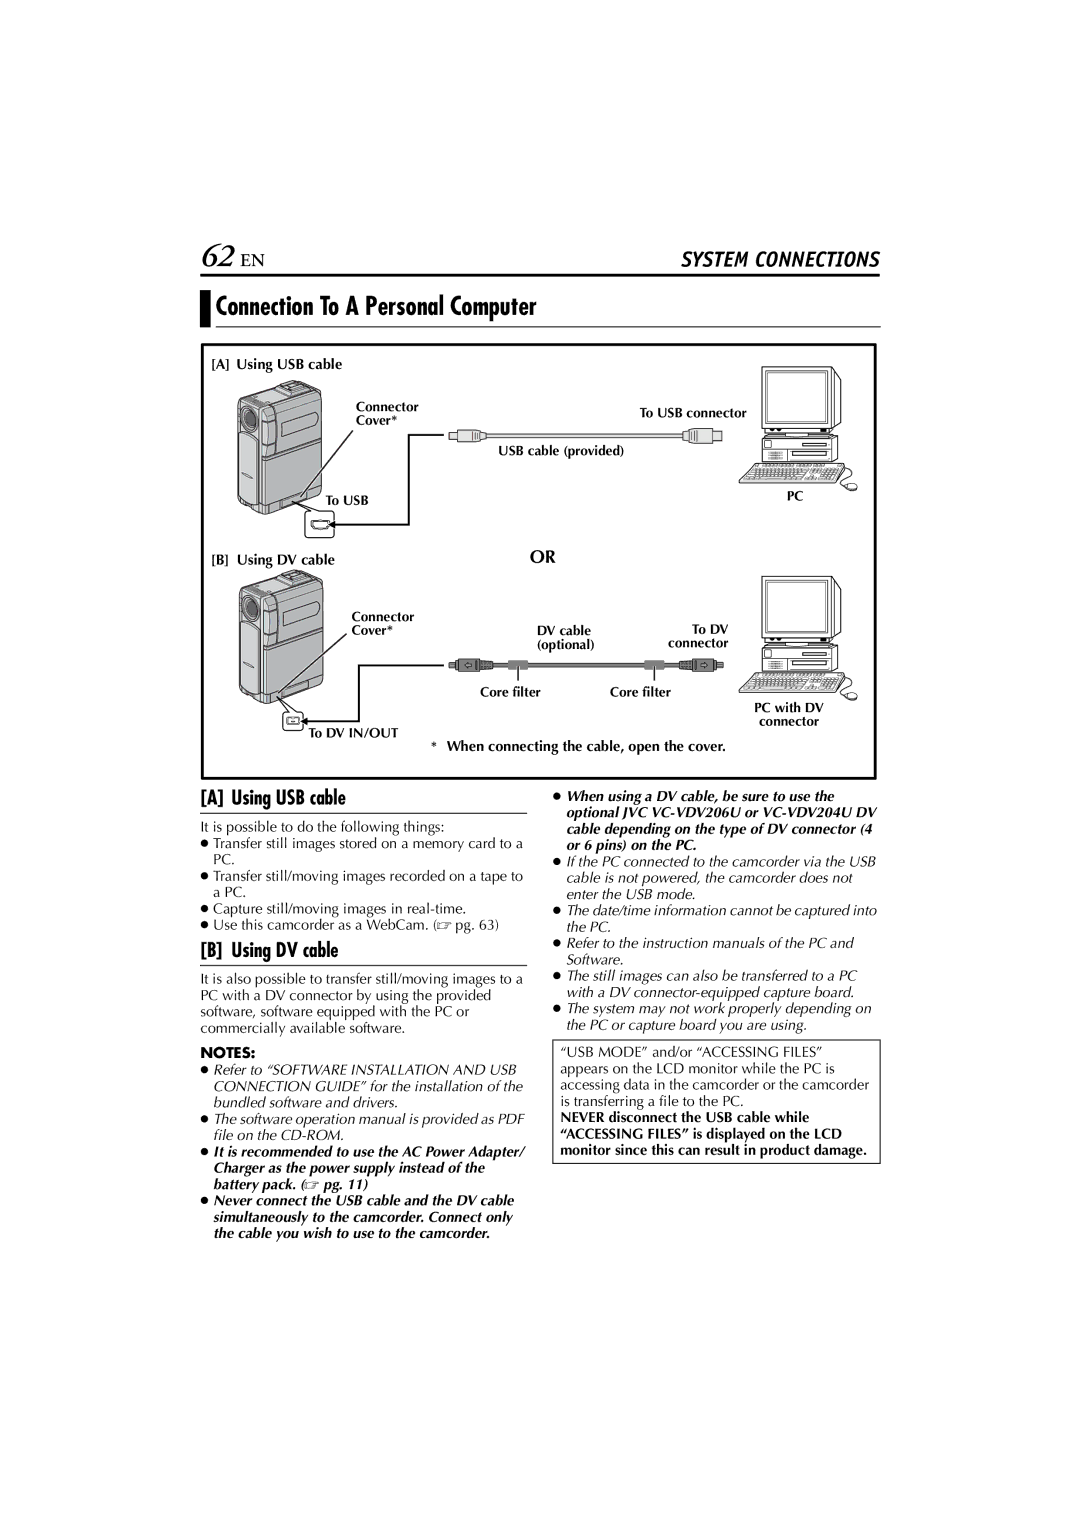 JVC GR-DVP10 manual 62 EN, Connection To a Personal Computer, Using USB cable, Using DV cable 